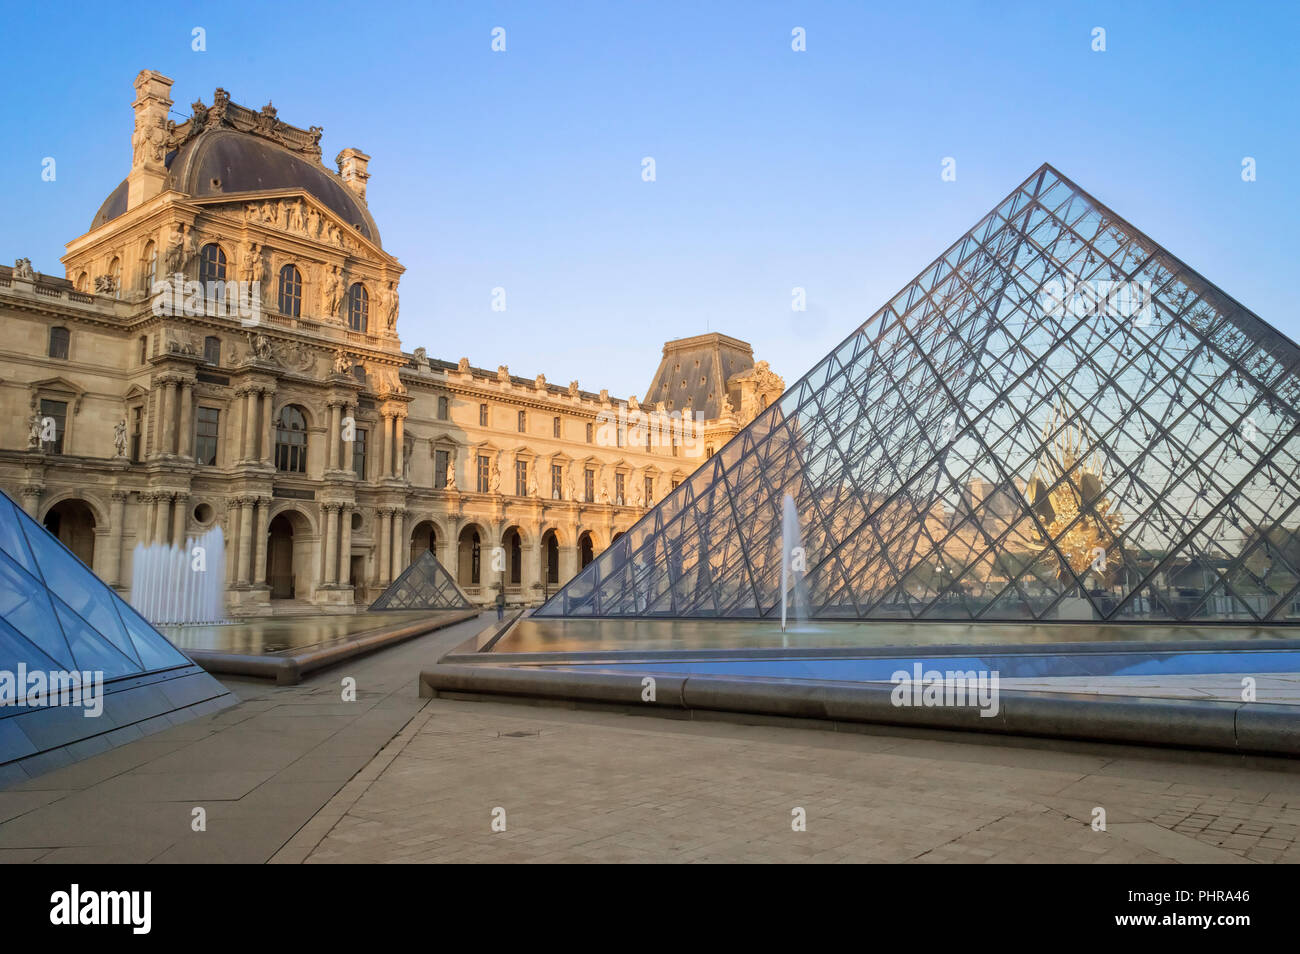 Paris, France - August 28, 2018: The Louvre Pyramid in Paris, France. It serves as the main entrance to the Musee du Louvre. Stock Photo